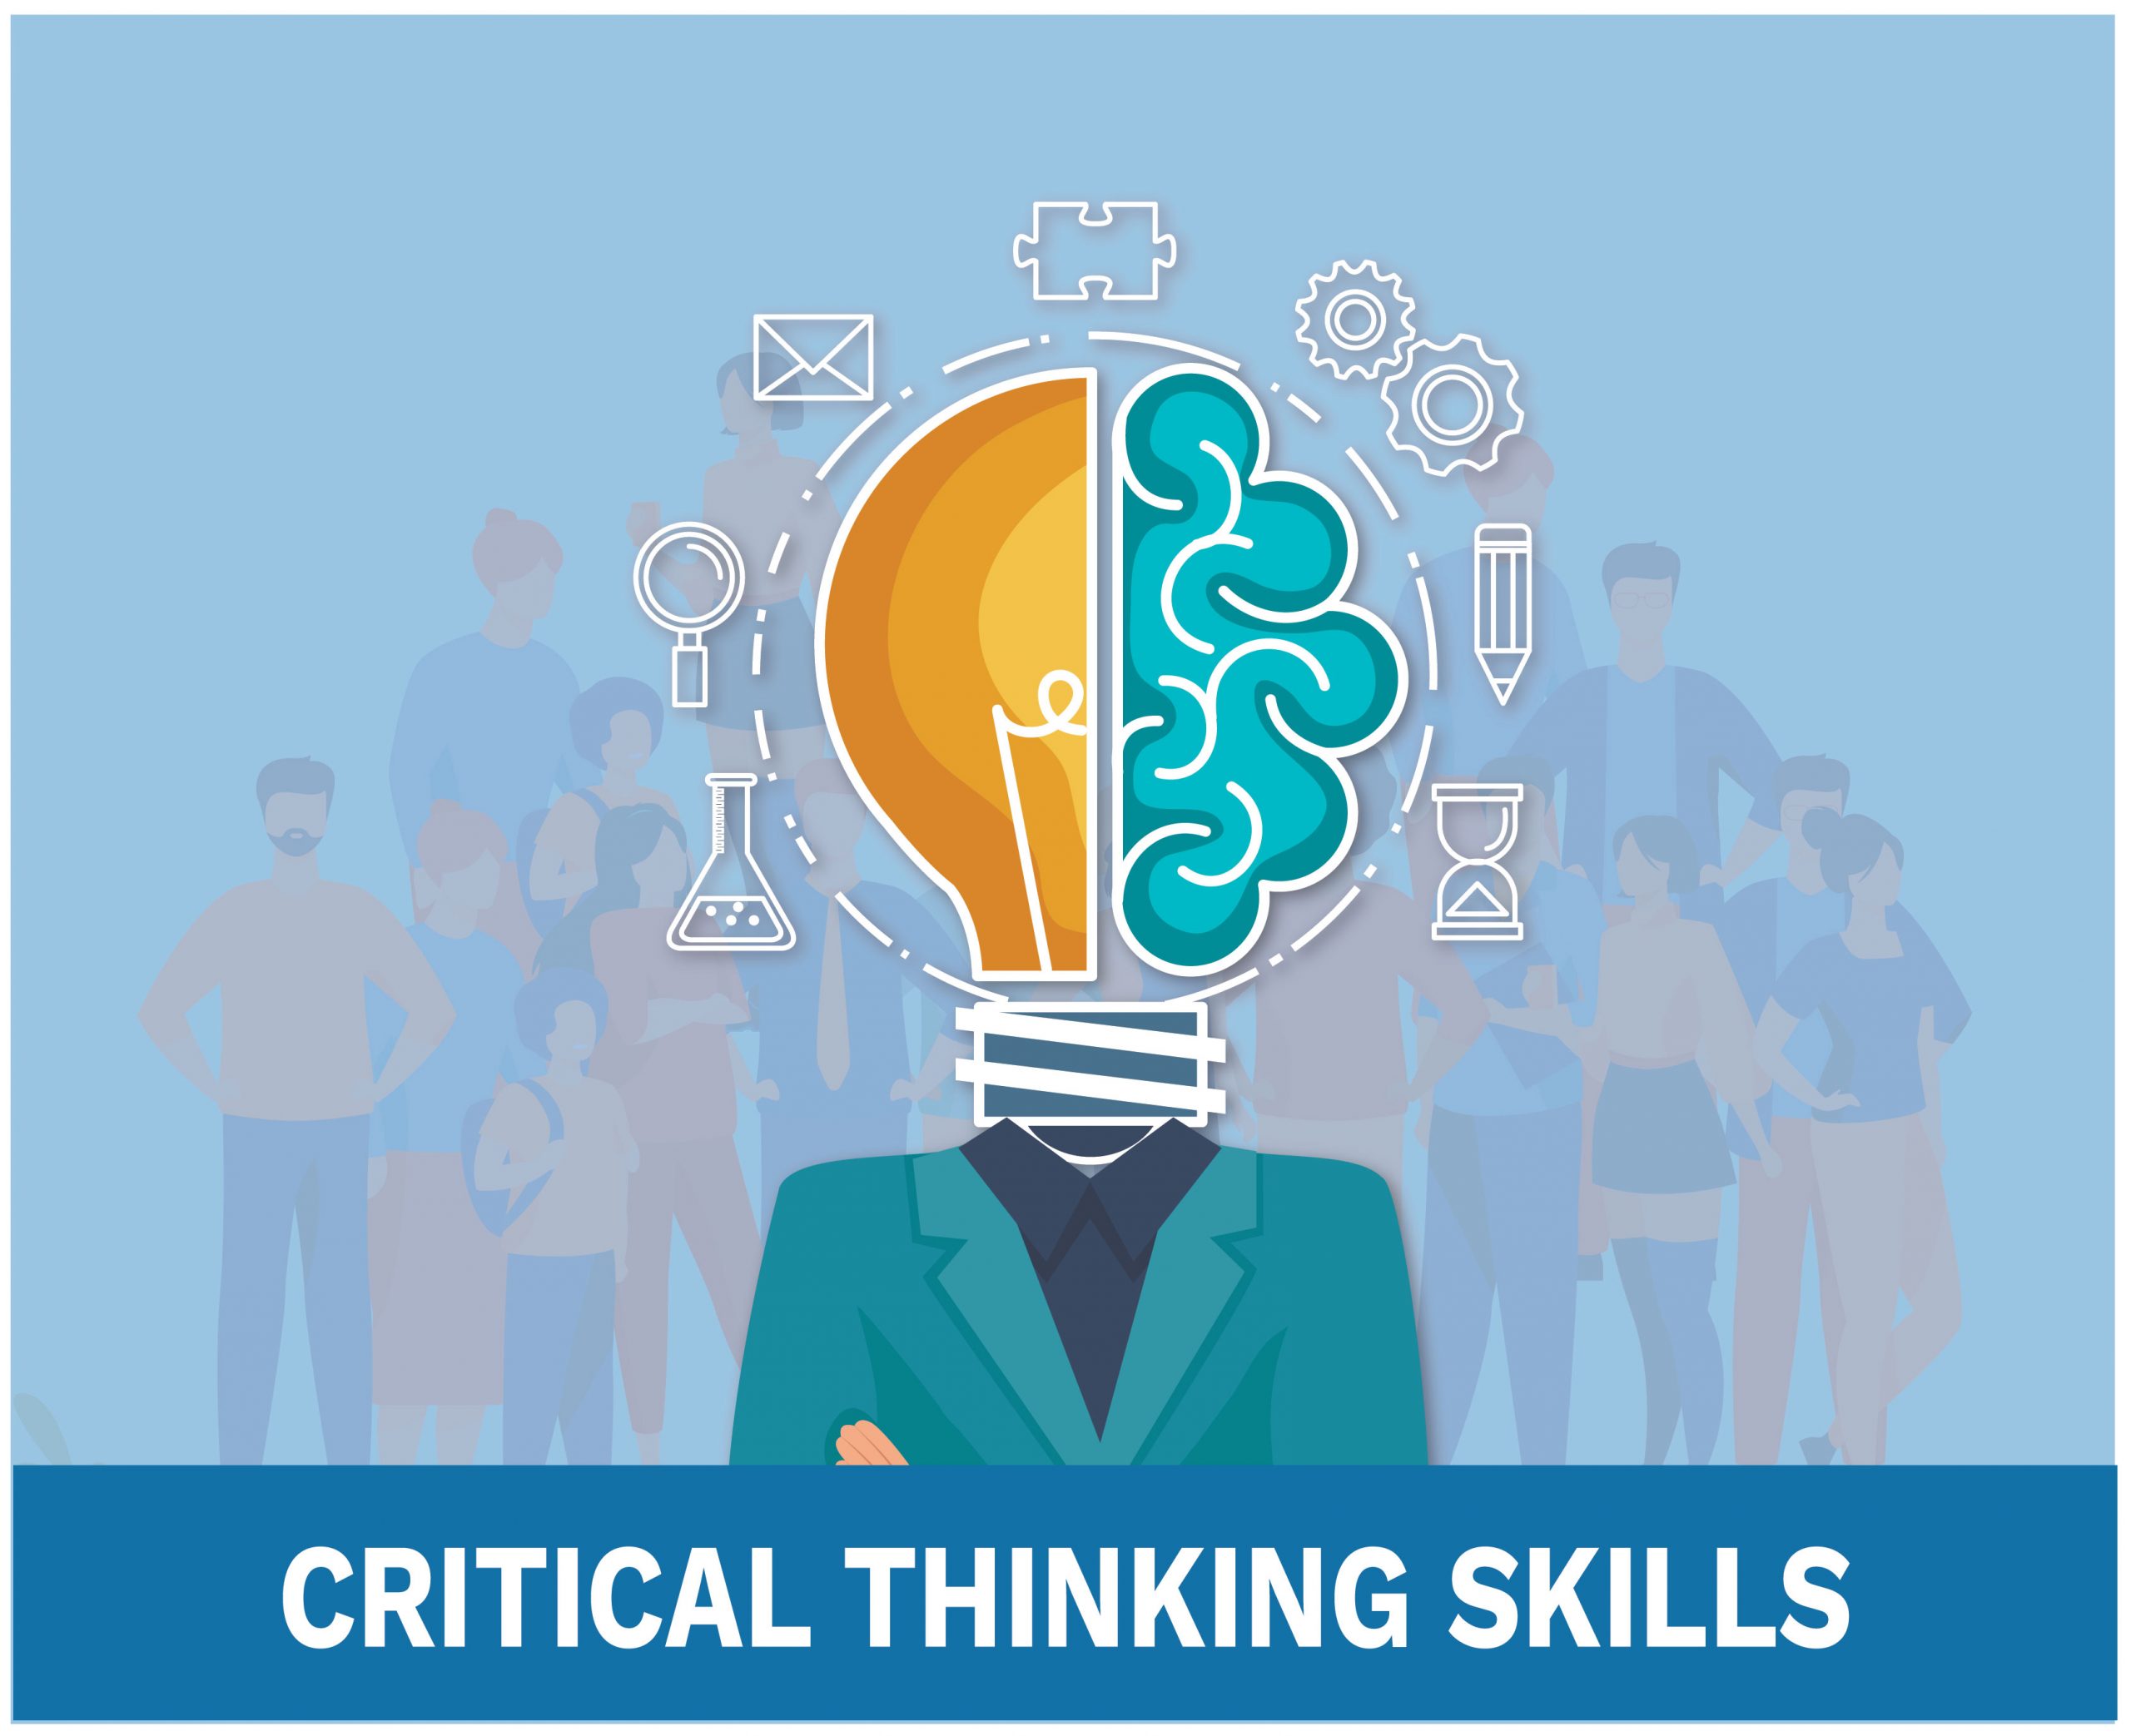 How to Develop Critical Thinking Skills in Students